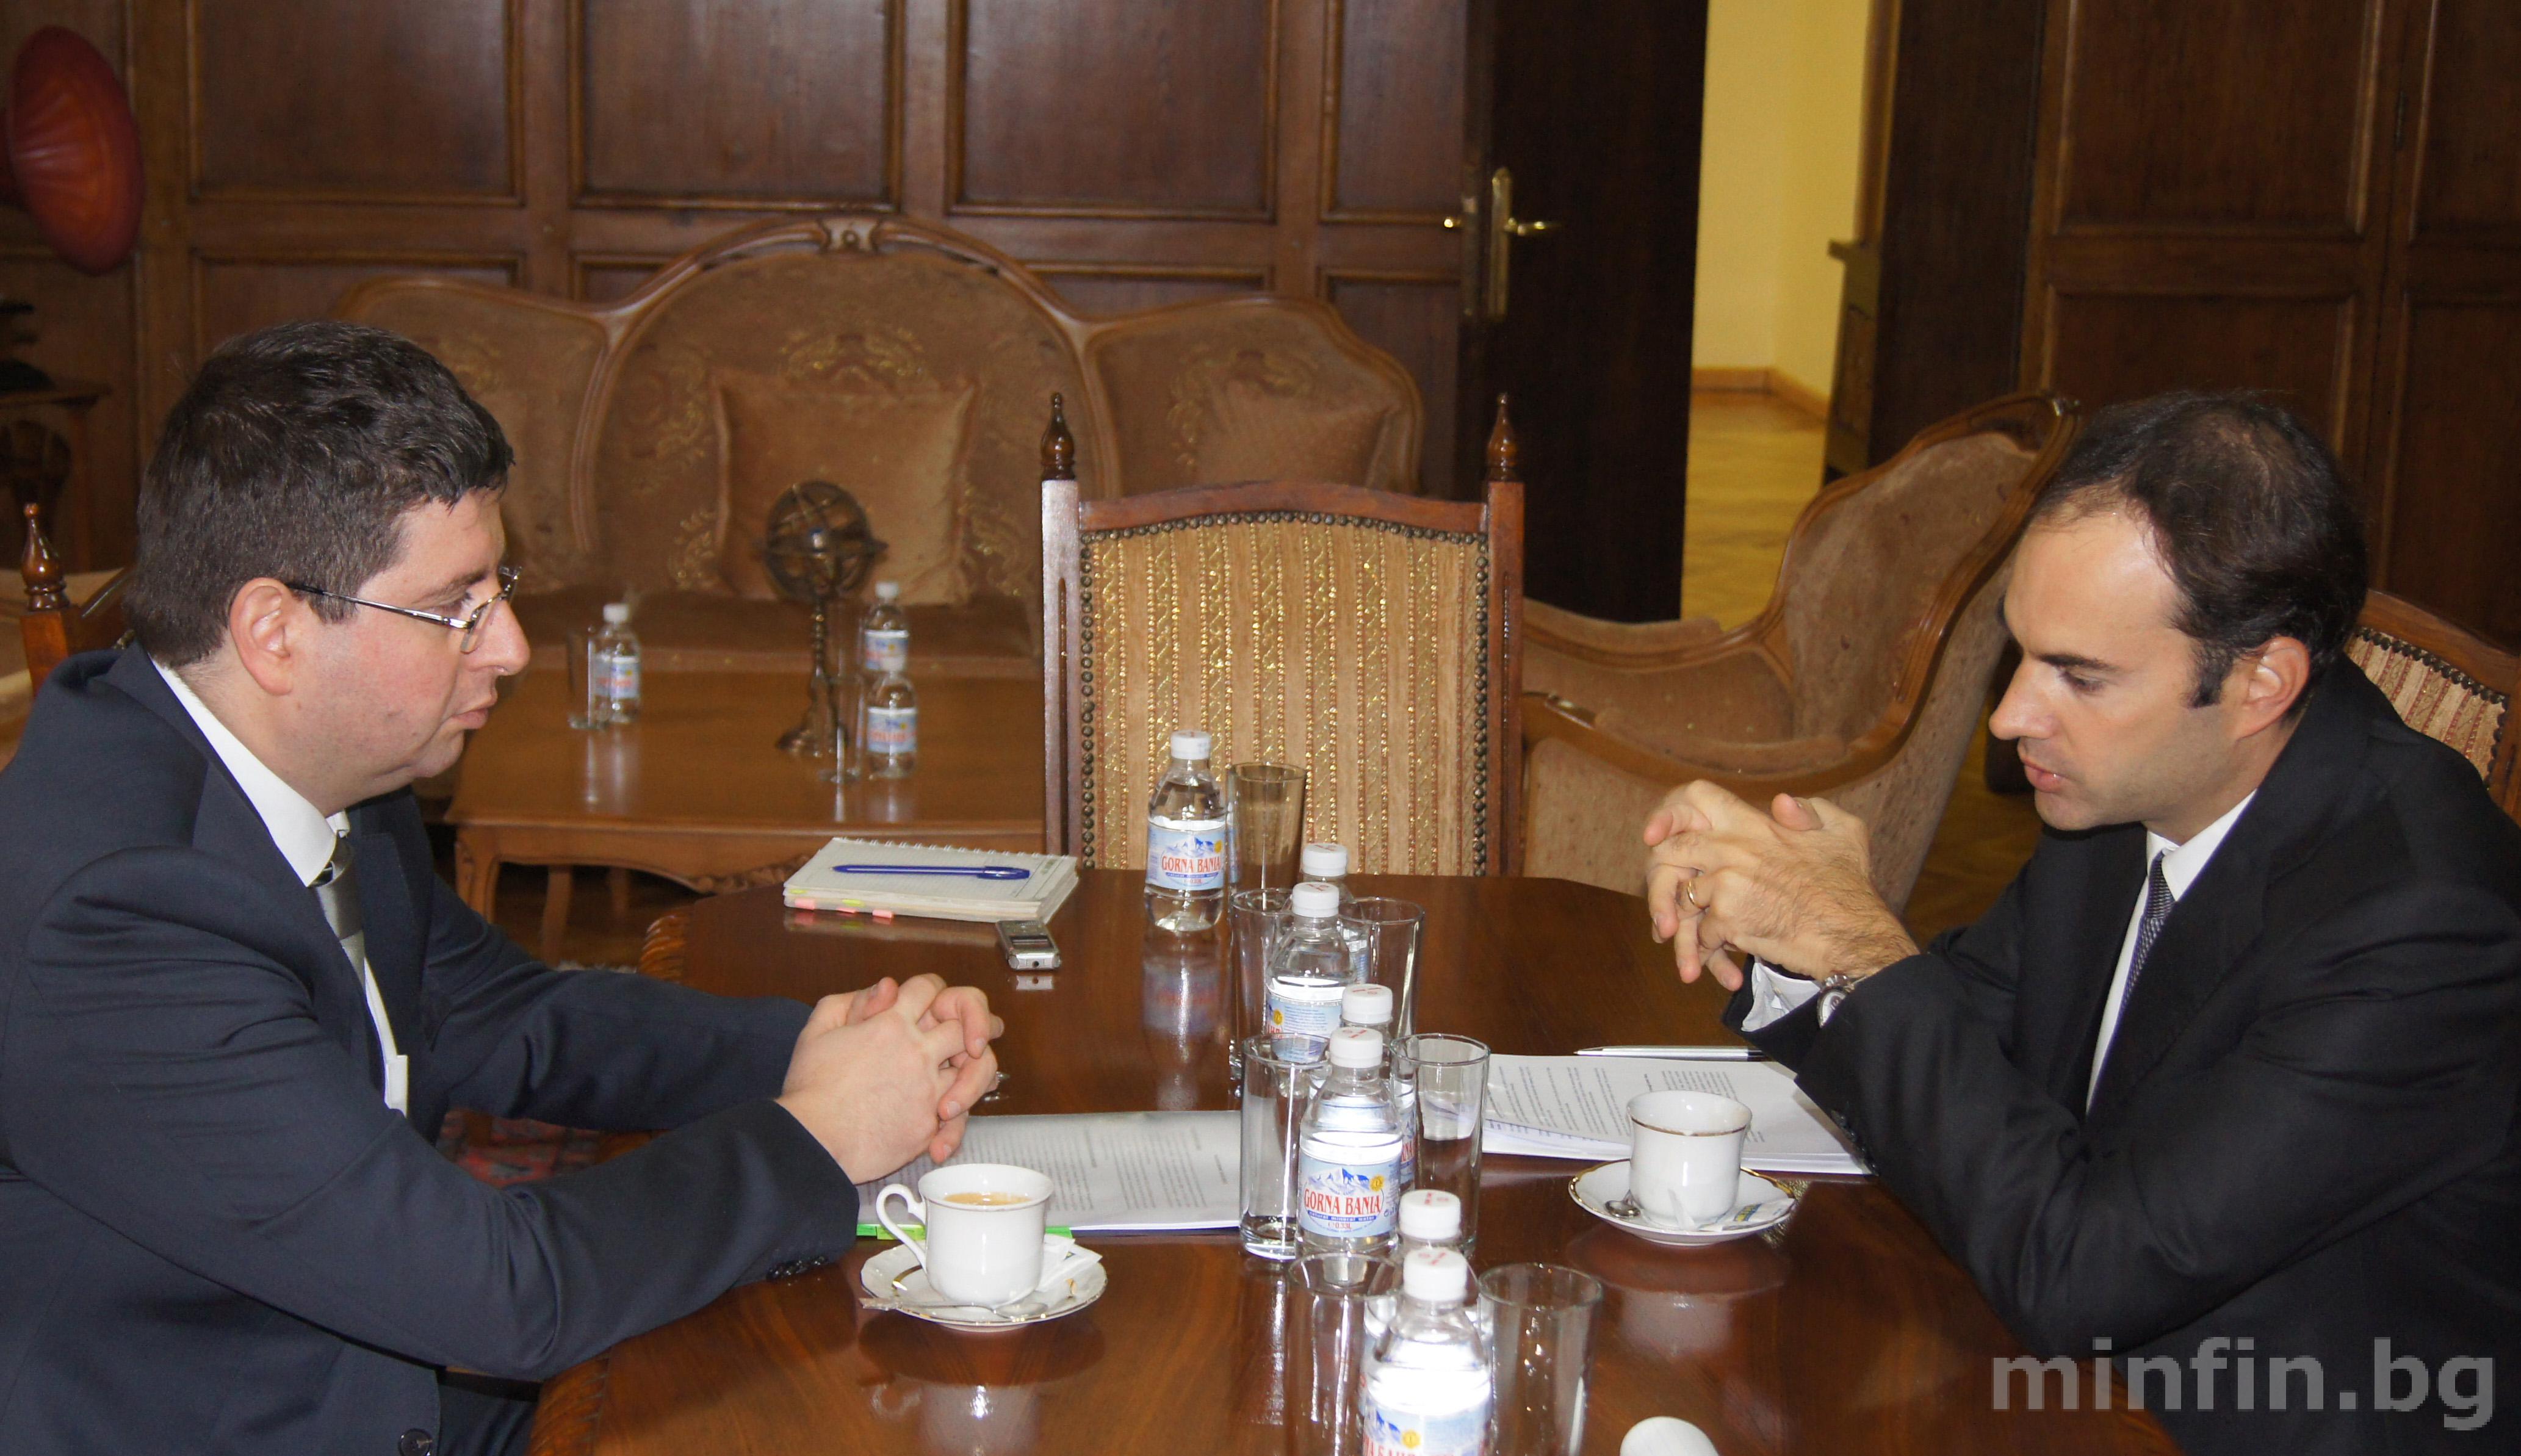 MINISTER OF FINANCE PETAR CHOBANOV HAS MET WITH THE IMF RESIDENT REPRESENTATIVE GUILLERMO TOLOSA